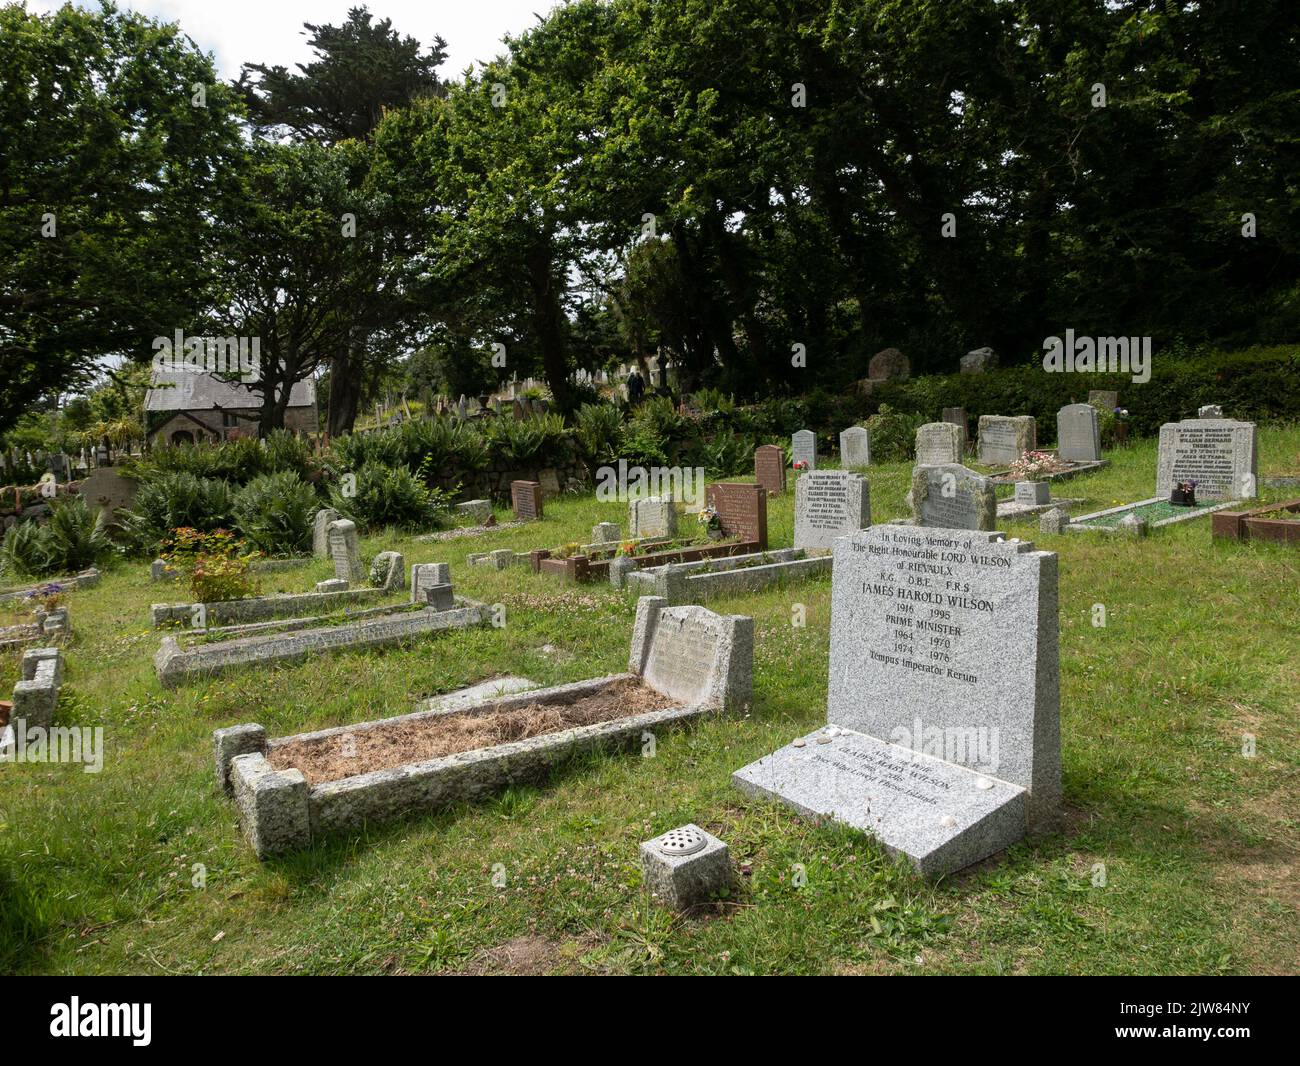 Harold Wilson's grave, The Church of St Mary the Virgin, Old Town, St Mary's, Isles of Scilly, Cornwall, England, UK. Stock Photo